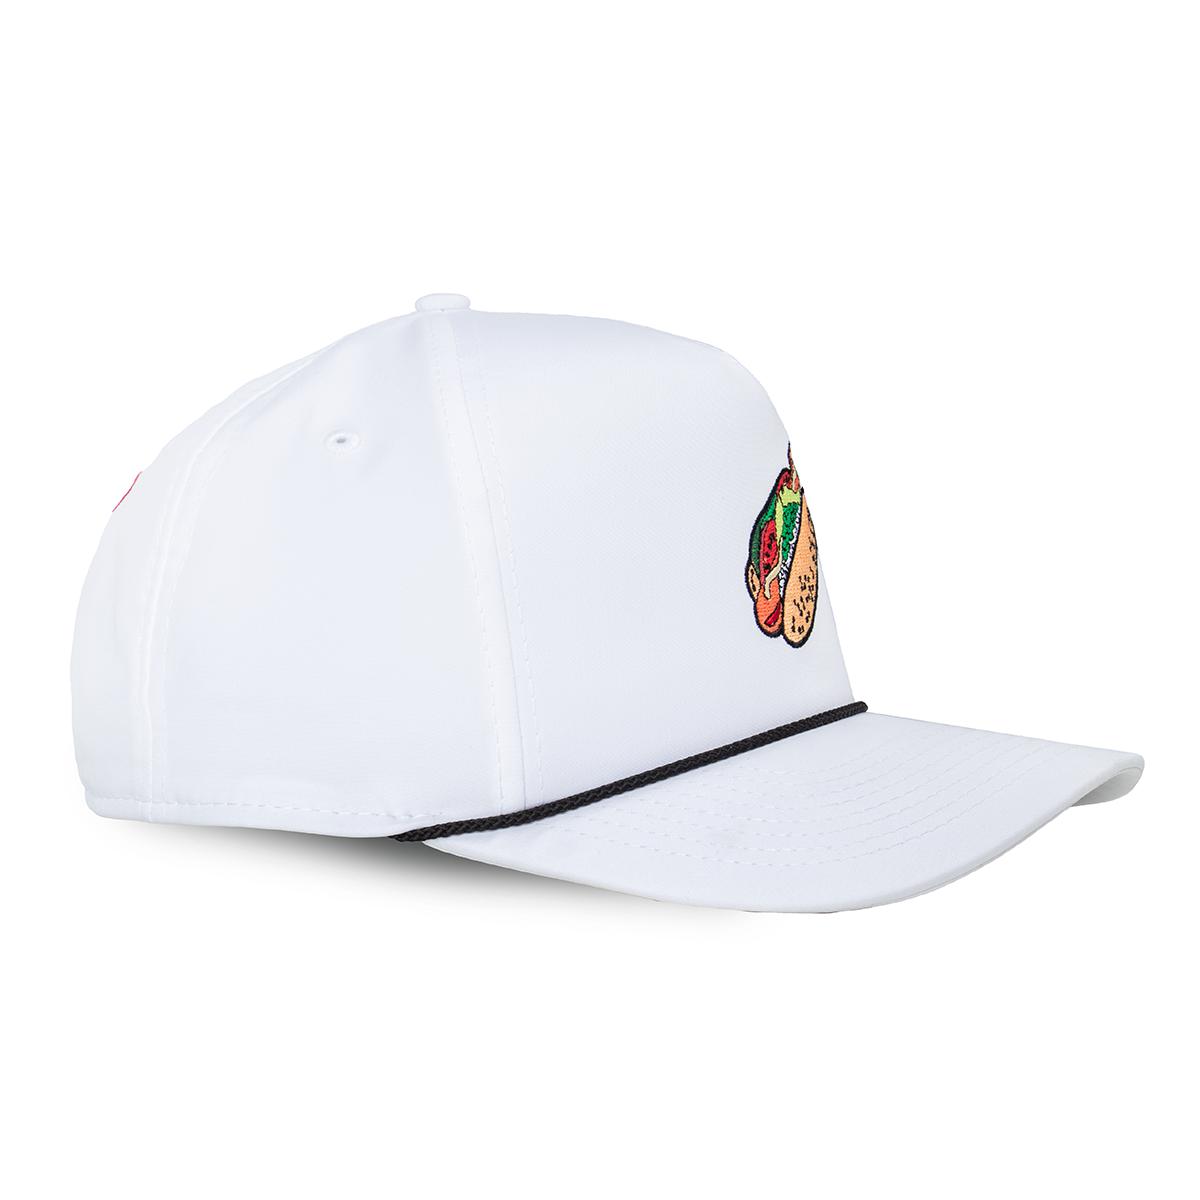 Barstool Chicago Hot Dog Imperial Rope Hat-Hats-Barstool Chicago-White-One Size-Barstool Sports